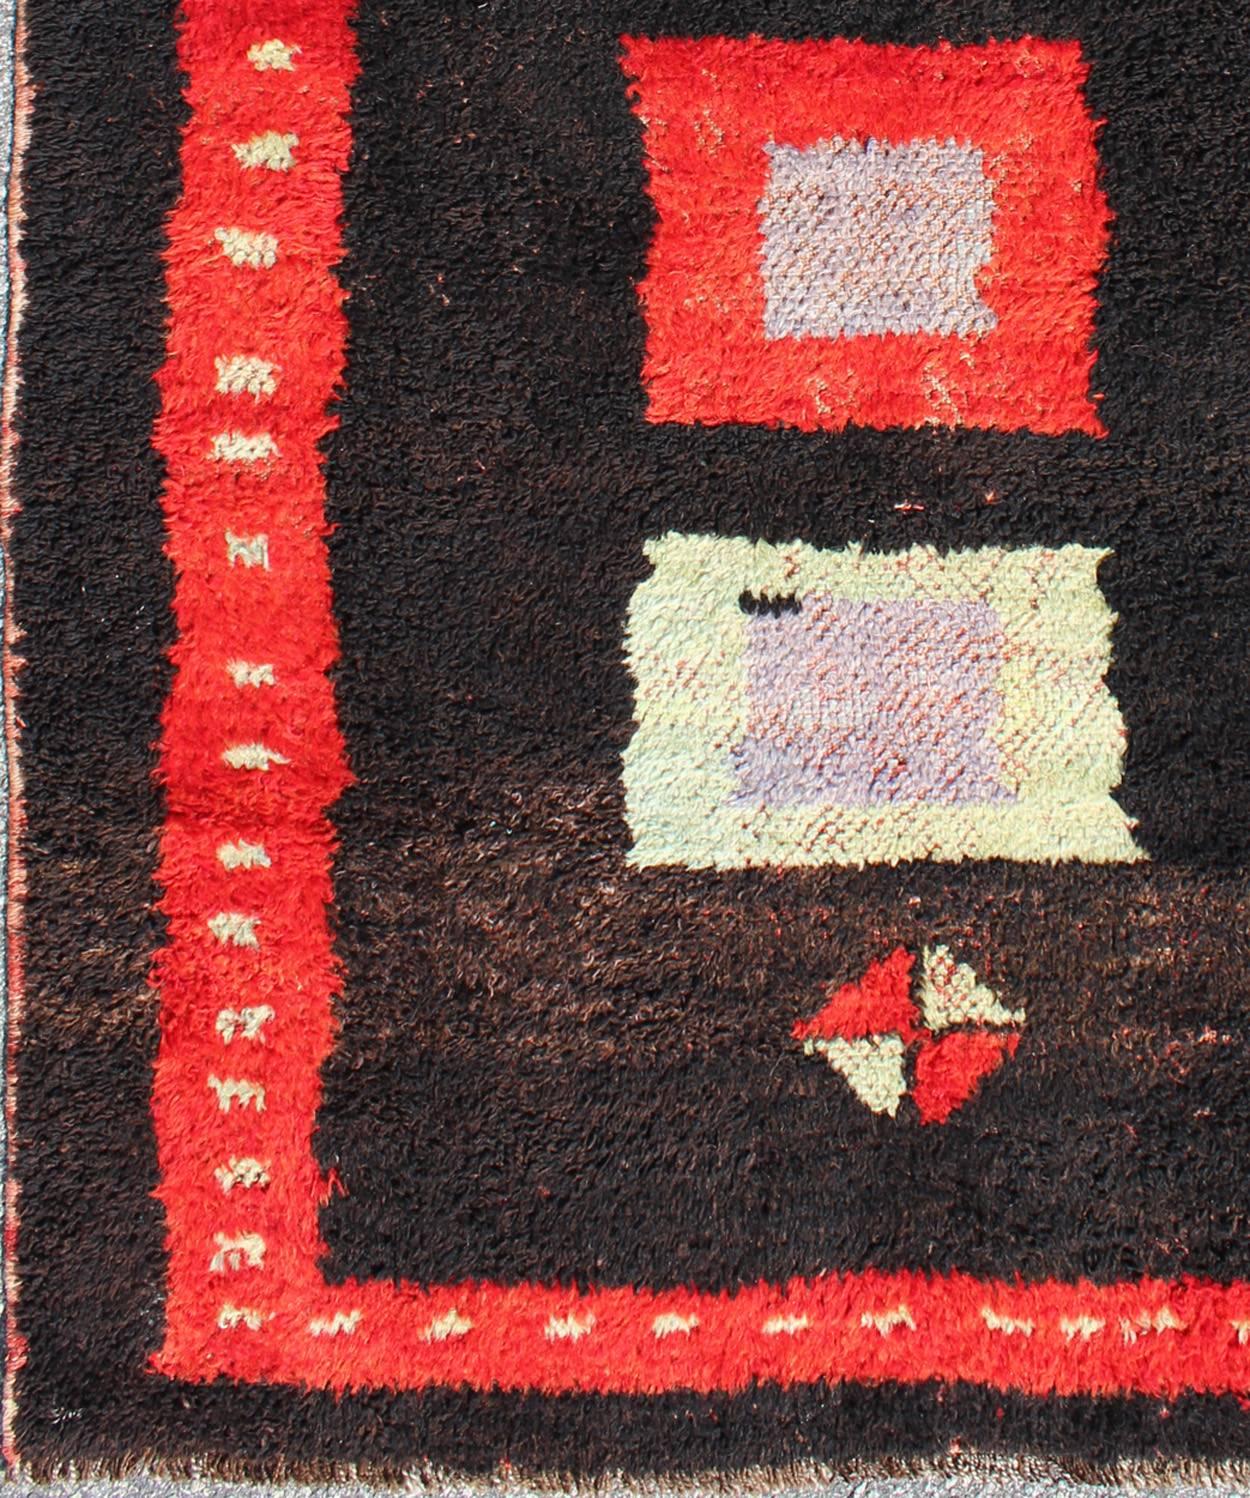 Modern Mid-20th Century Turkish Tulu Rug with Geometric Shapes in Vivid Red,  brown, yellow.
rug en-142566, country of origin / type: Turkey / Tulu, circa 1950

This vintage Tulu rug from Turkey (circa mid-20th century) is both minimalist and